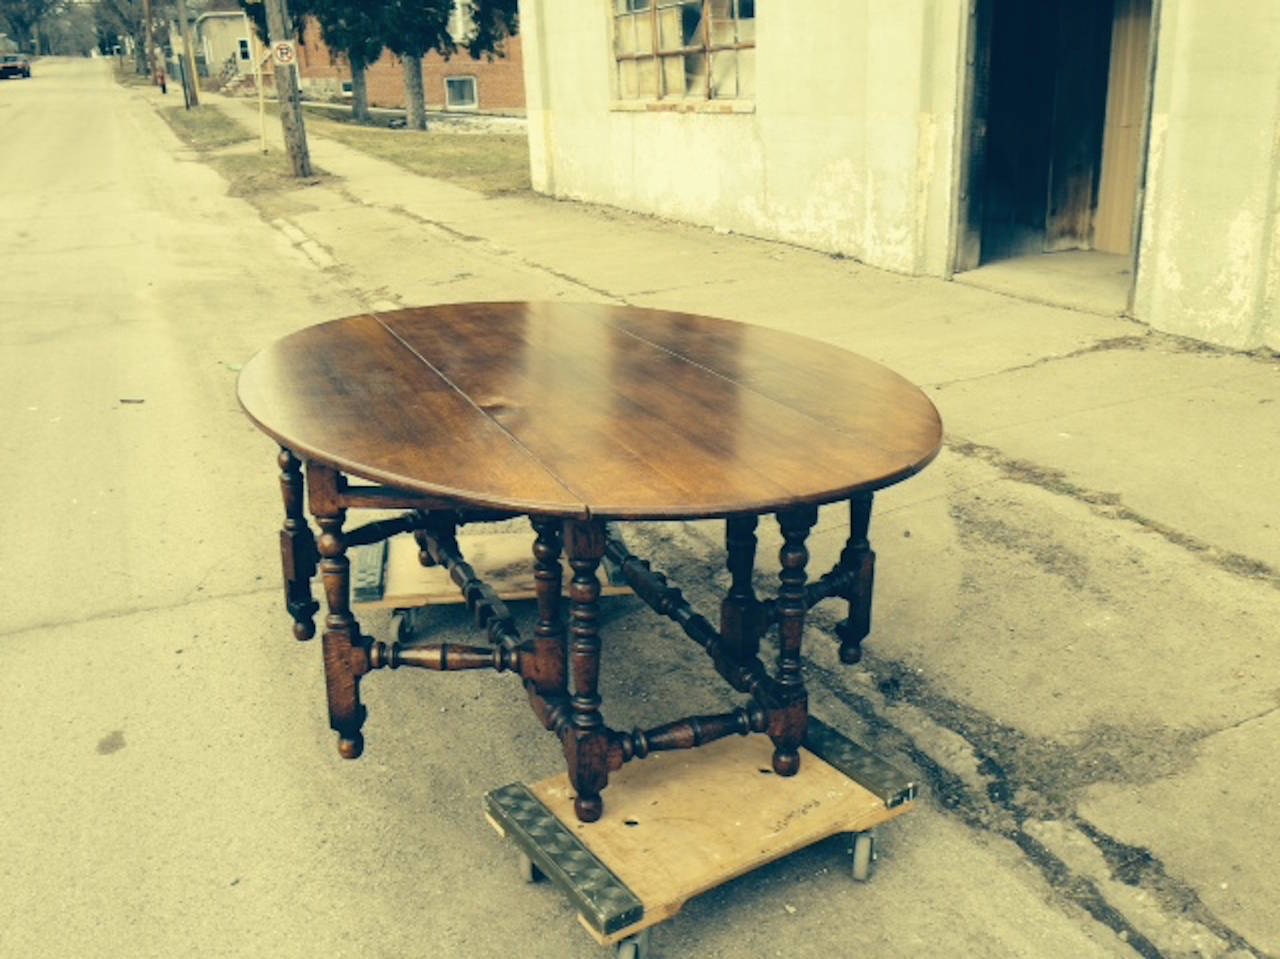 English, Handcrafted 17th Century Style Drop-Leaf Table For Sale 3